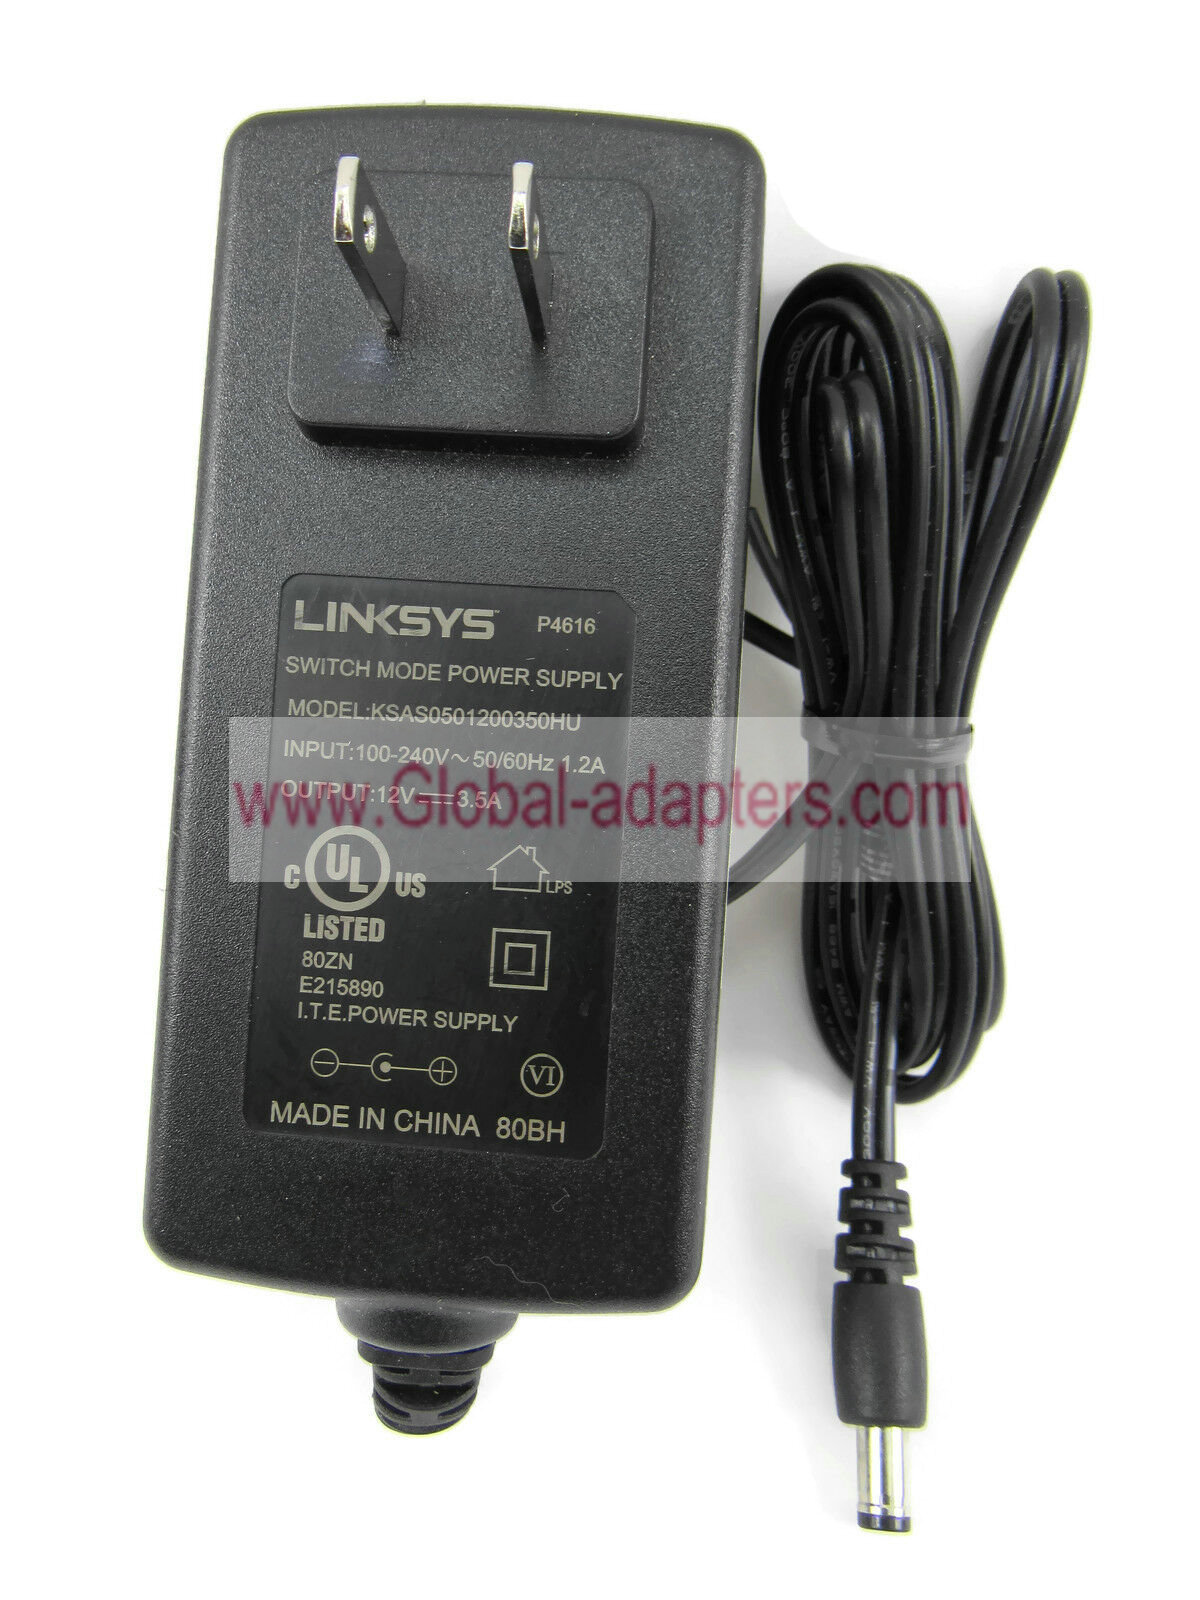 New Linksys KSAS0501200350HU Switch Mode Power Adapter 2103-30103502R 12V 3.5A ac charger New